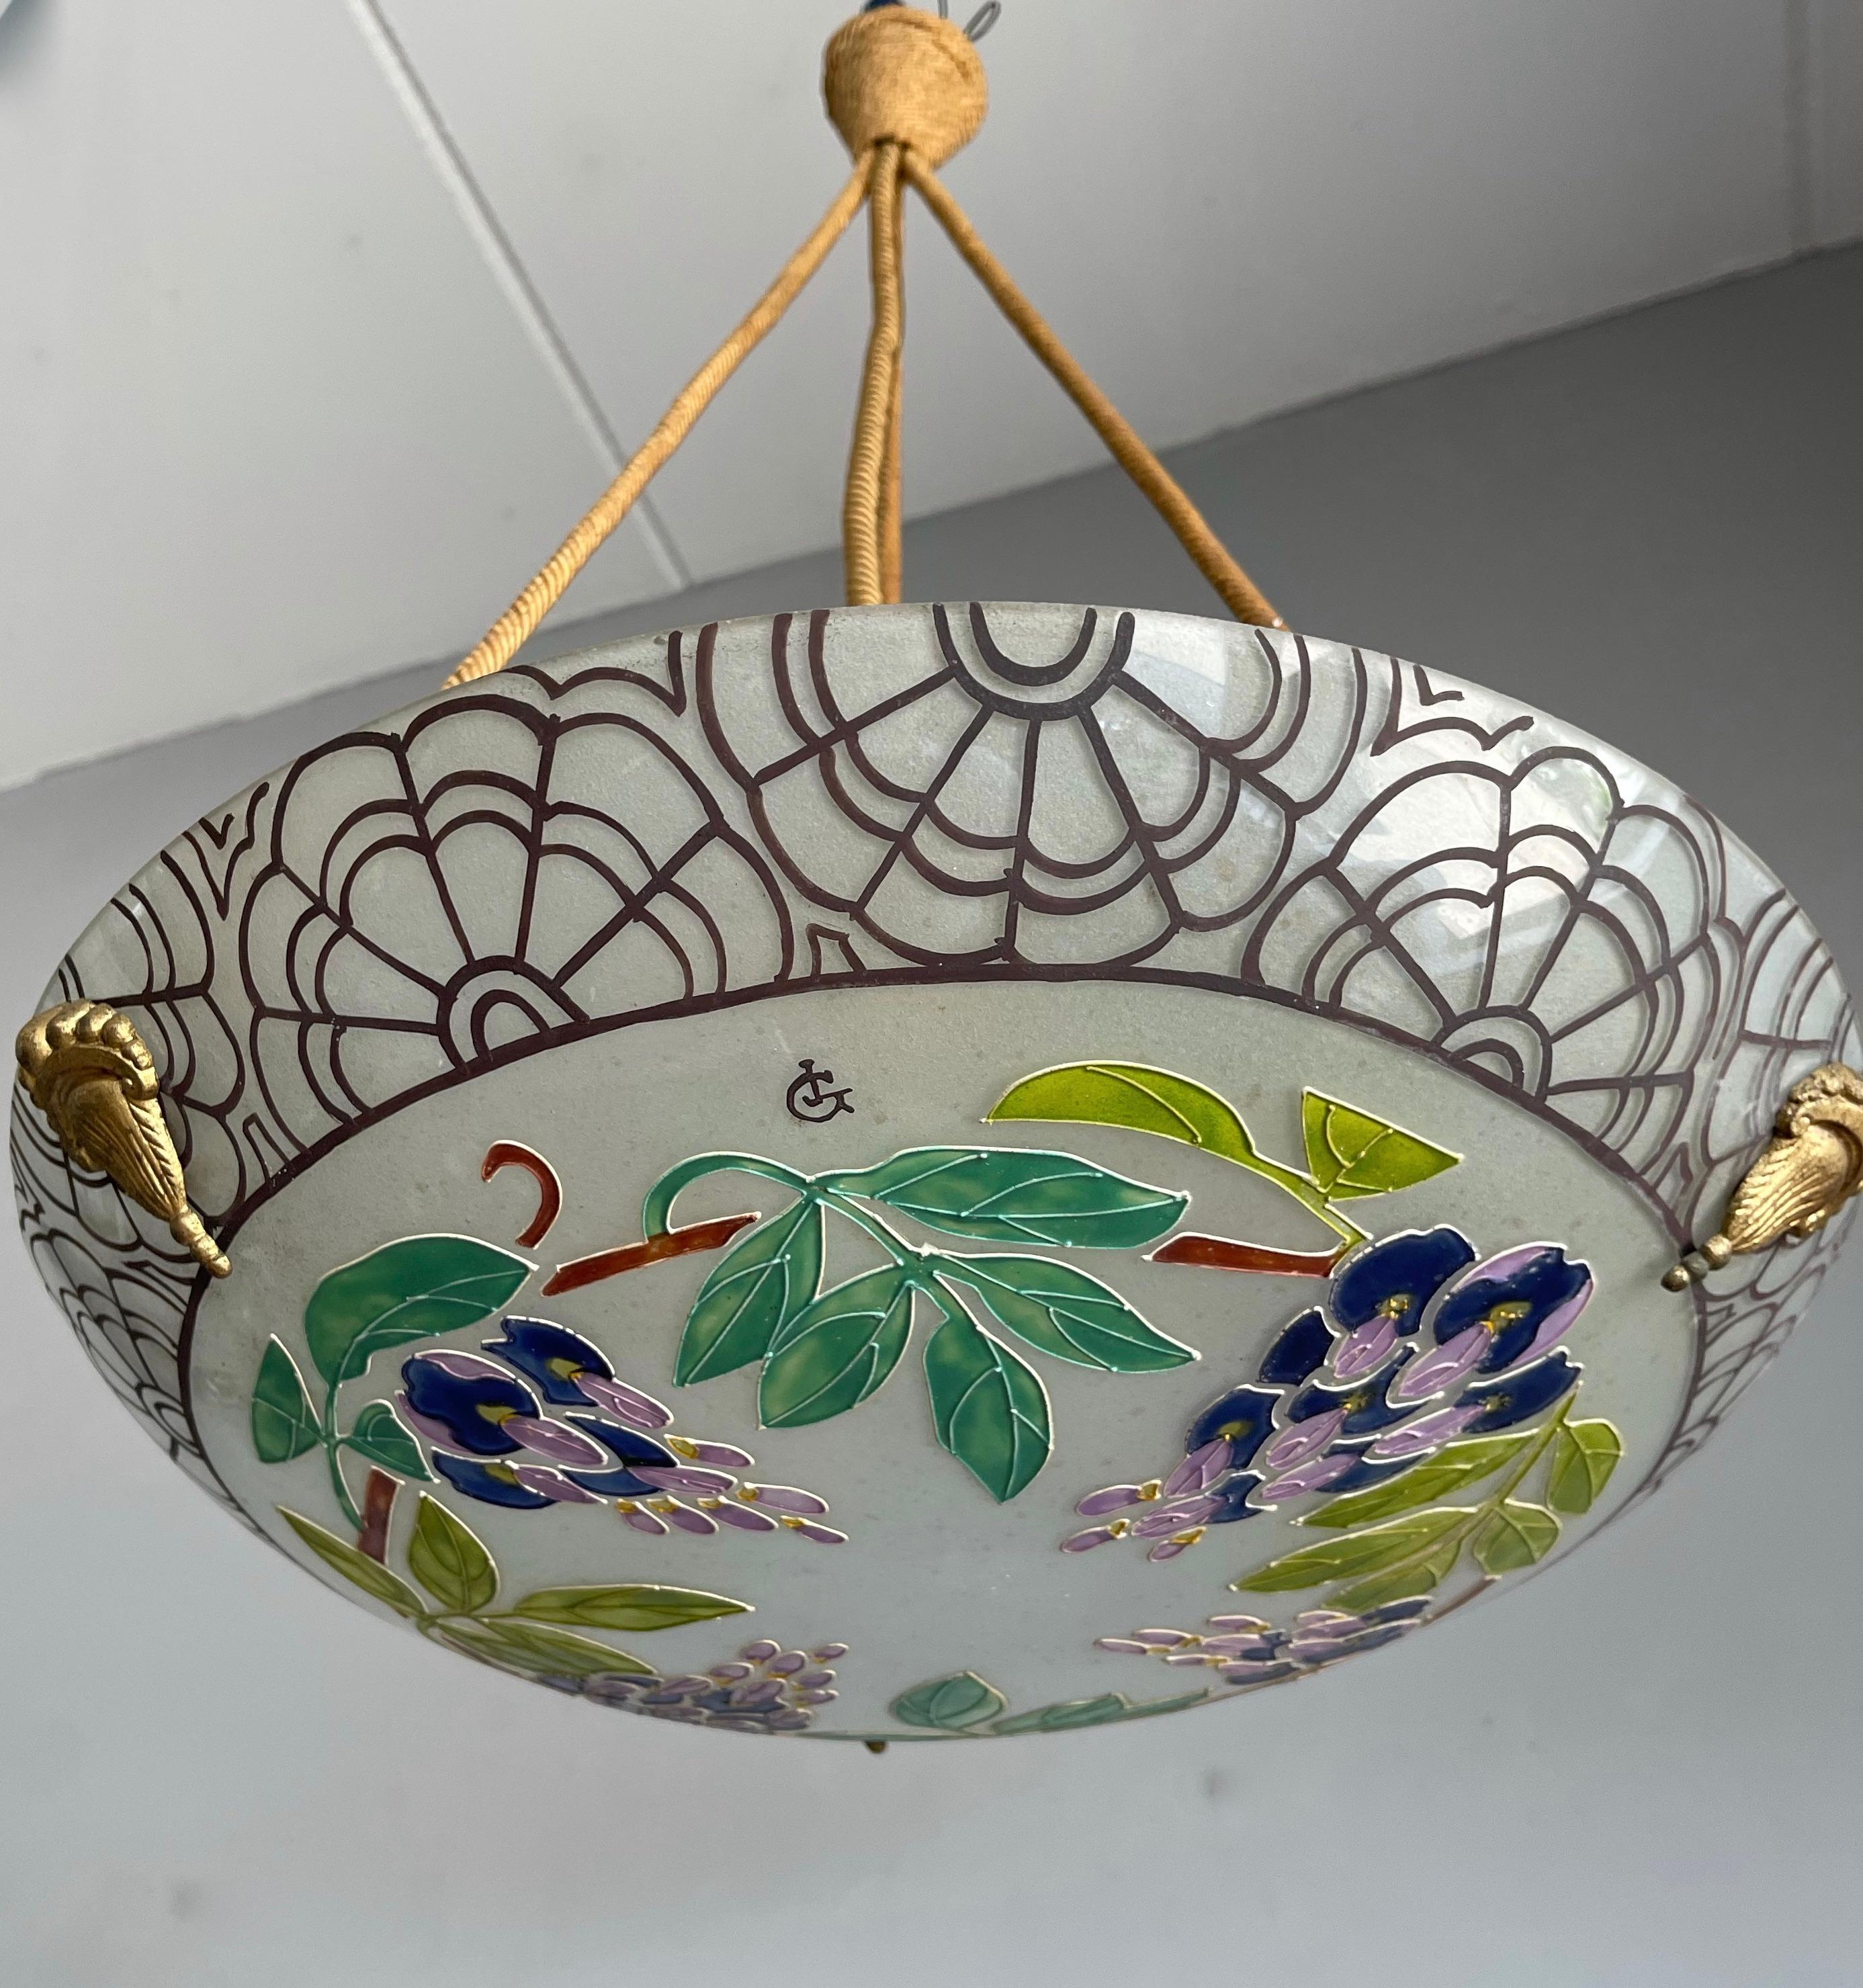 Rare and stunning work of lighting art in the manner of Loys Lucha.

The glass shande is marked with initials of the artist (picture 3 and 4).
If you are passionate about early 20th century decorative art then you will love this striking pendant.